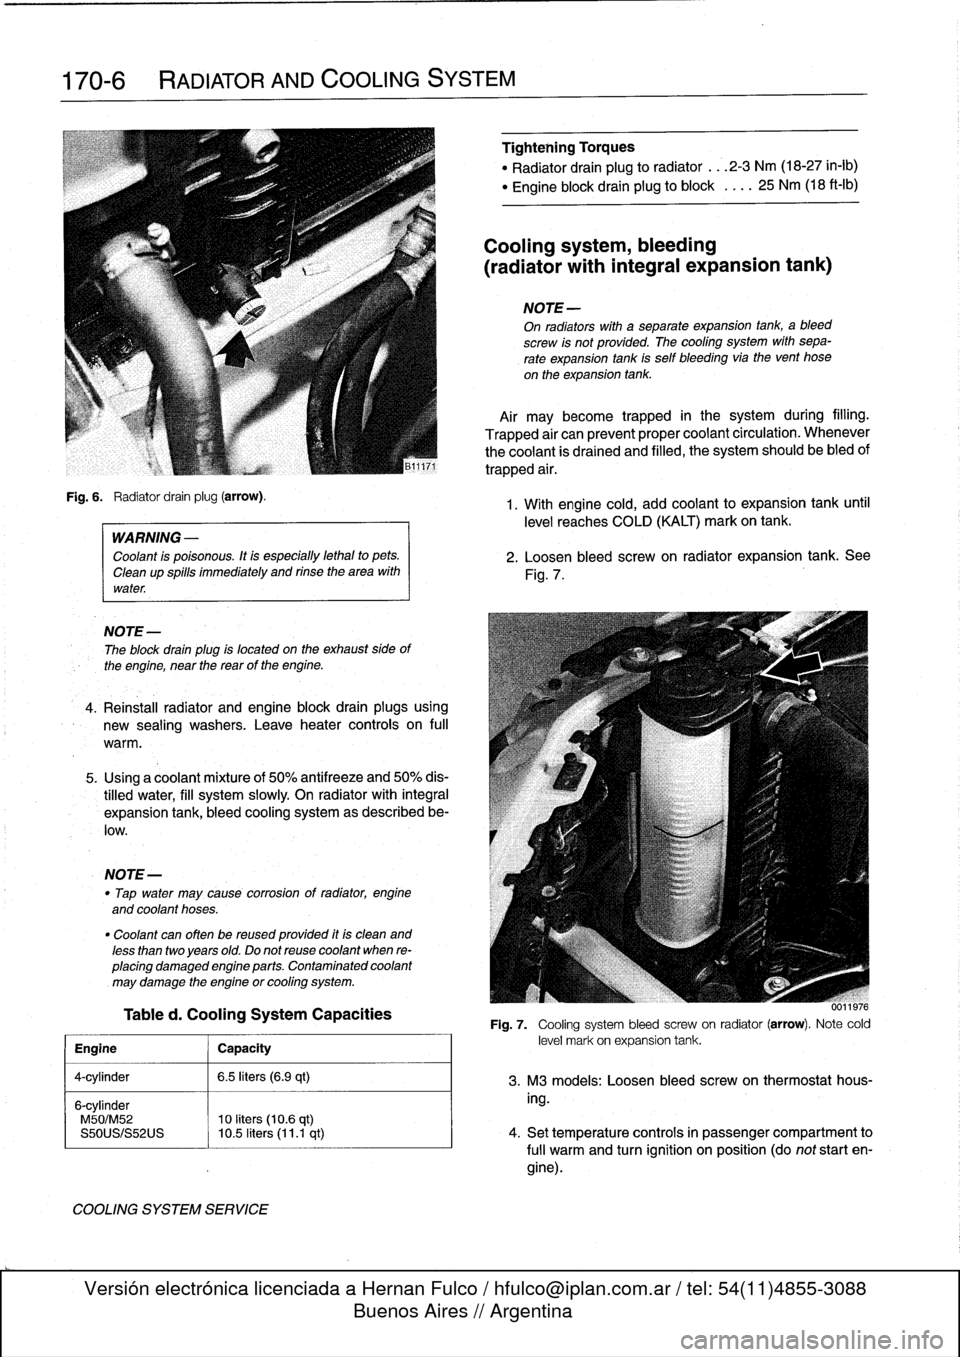 BMW 318i 1998 E36 Workshop Manual 
170-6

	

RADIATOR
AND
COOLING
SYSTEM

Fig
.
6
.

	

Radiator
drain
plug
(arrow)
.

WARNING
-

Coolant
is
poisonous
.
Itis
especially
lethal
to
pets
.

Cleanup
spills
immediately
and
rinse
the
area
w